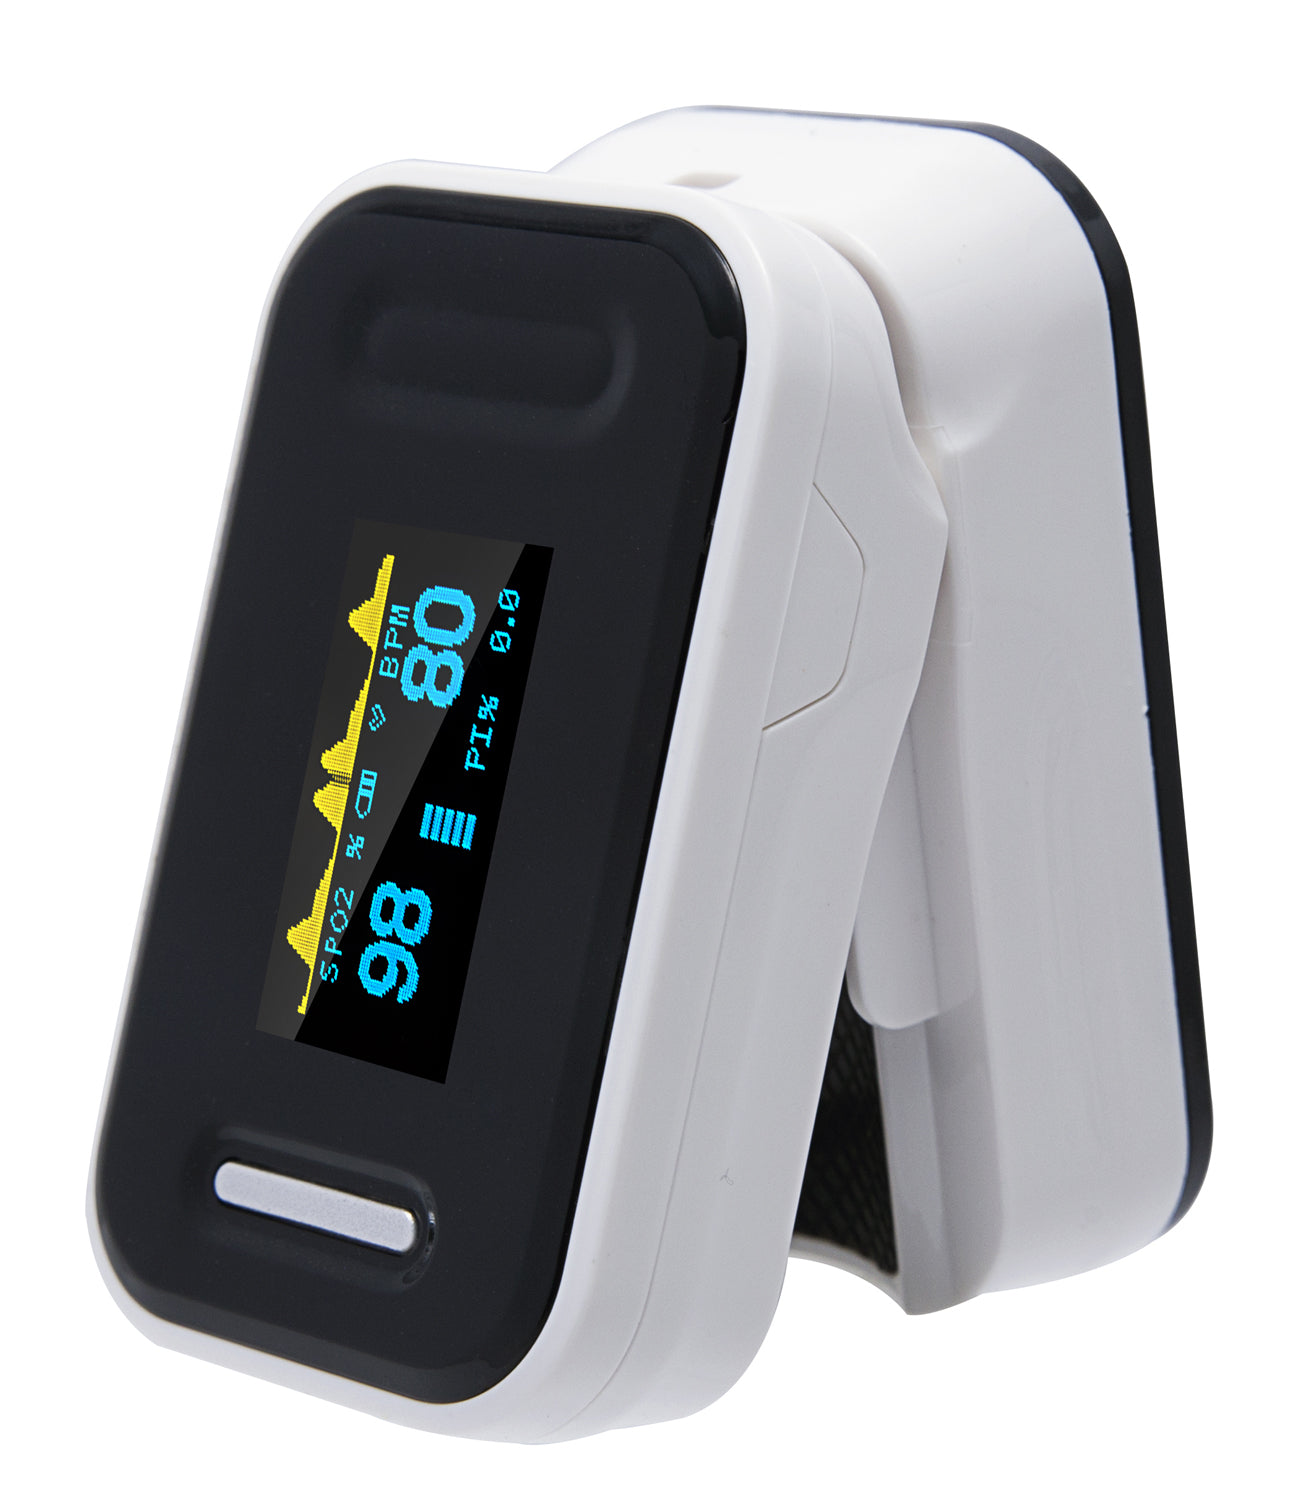 Pulse Oximeter UK, CE 0123 Certified, Oximeter adhere to NHS Guidance, OLED Big Display, Fingertip Oxygen Saturation Level Monitor for All Age Group, Accurate Fast Result & Easy Reading (6838798450787)